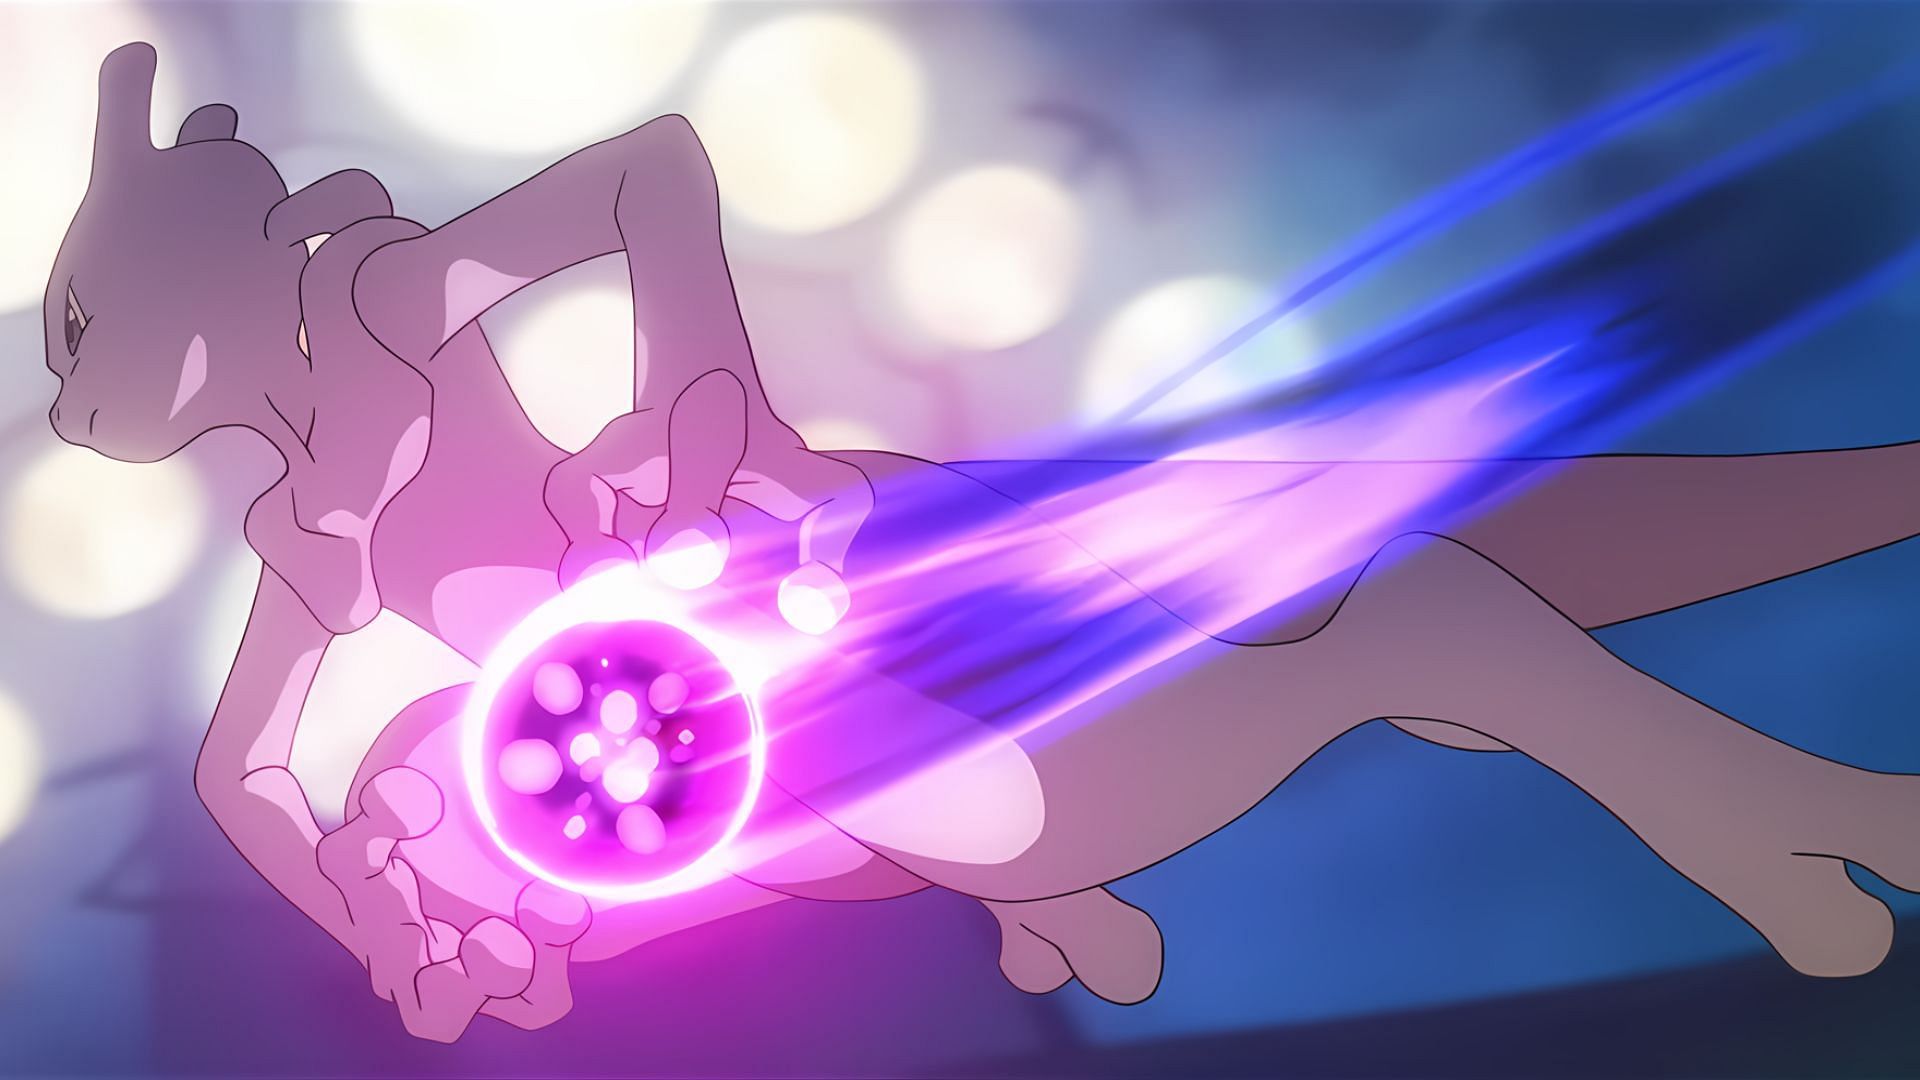 Mewtwo in the Celestial video (Image via The Pokemon Company)